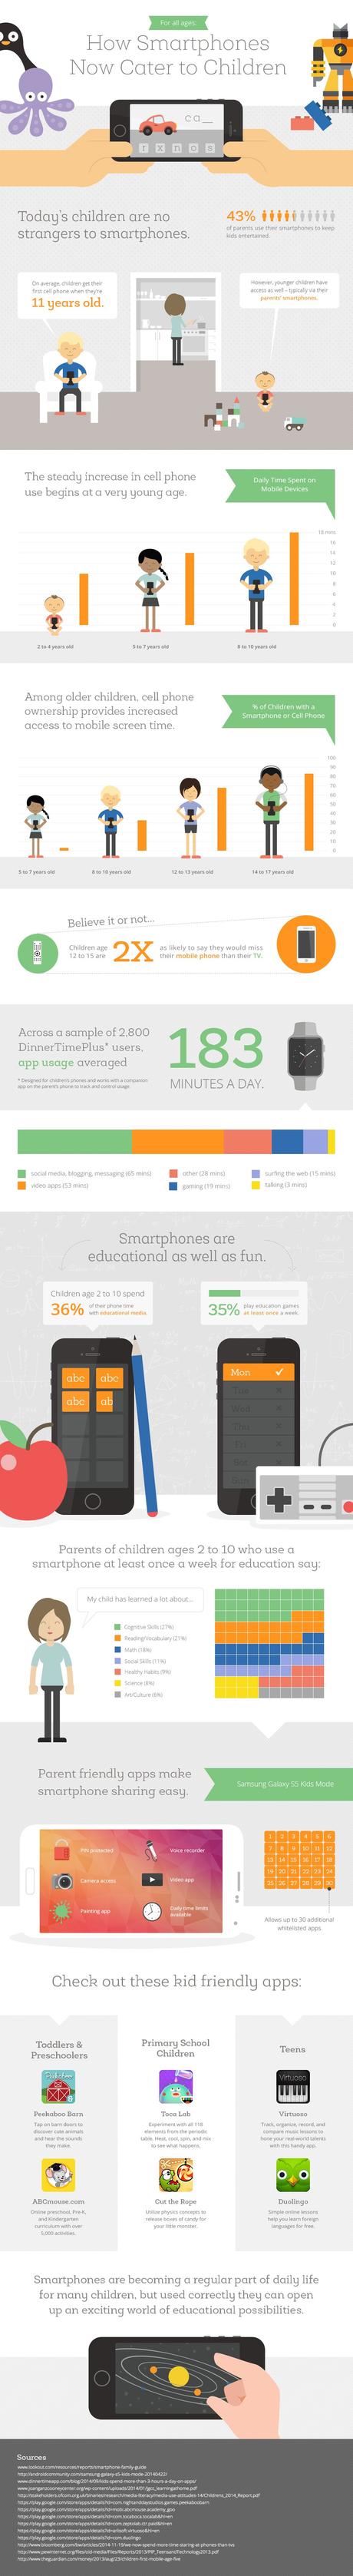 Learn How Smartphones Now Cater to Children {Infographic}